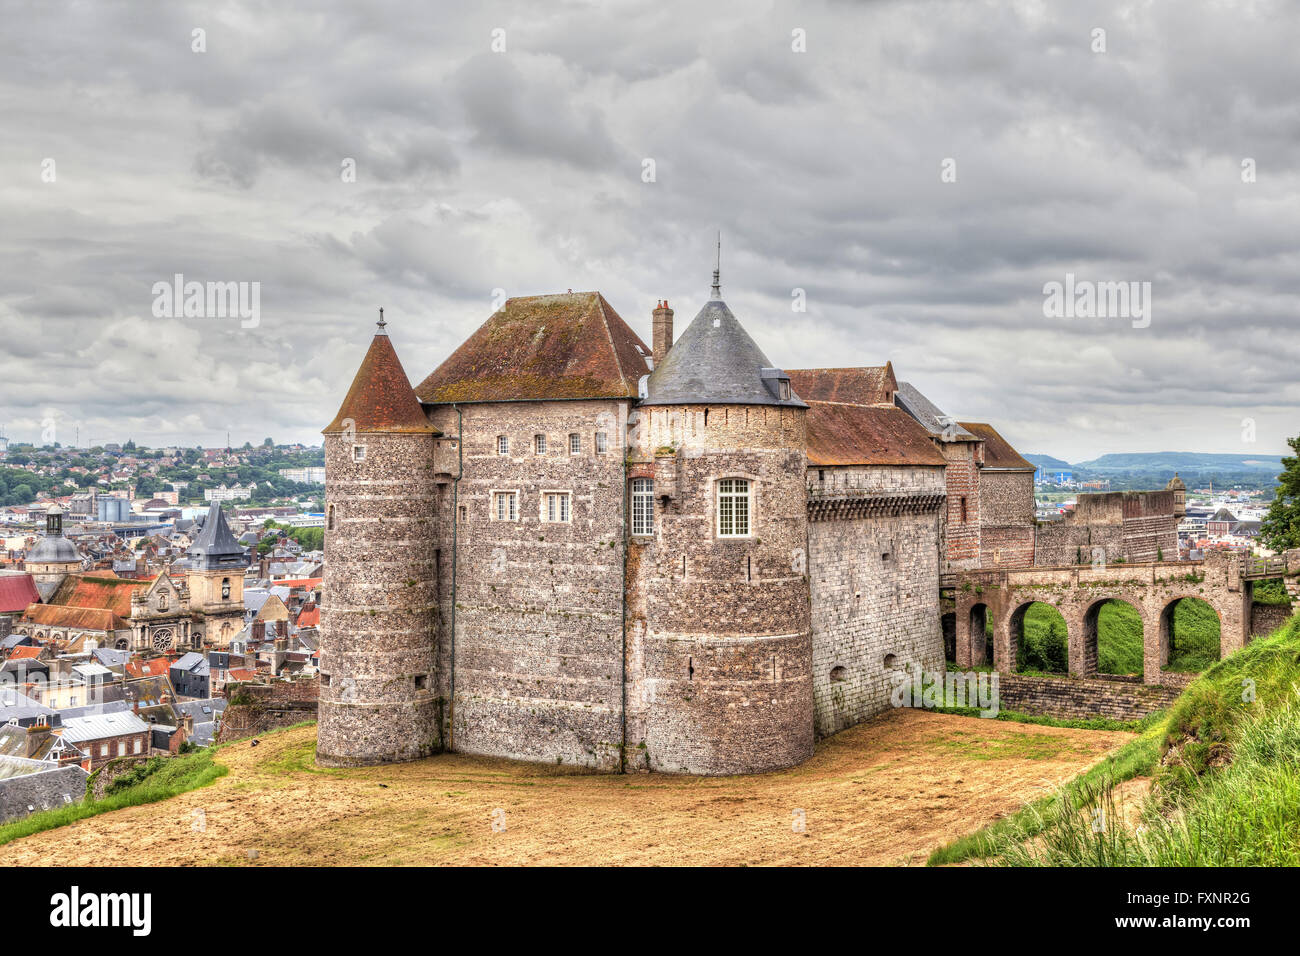 Castle of city Dieppe, Normandy, France (with HDR effect) Stock Photo